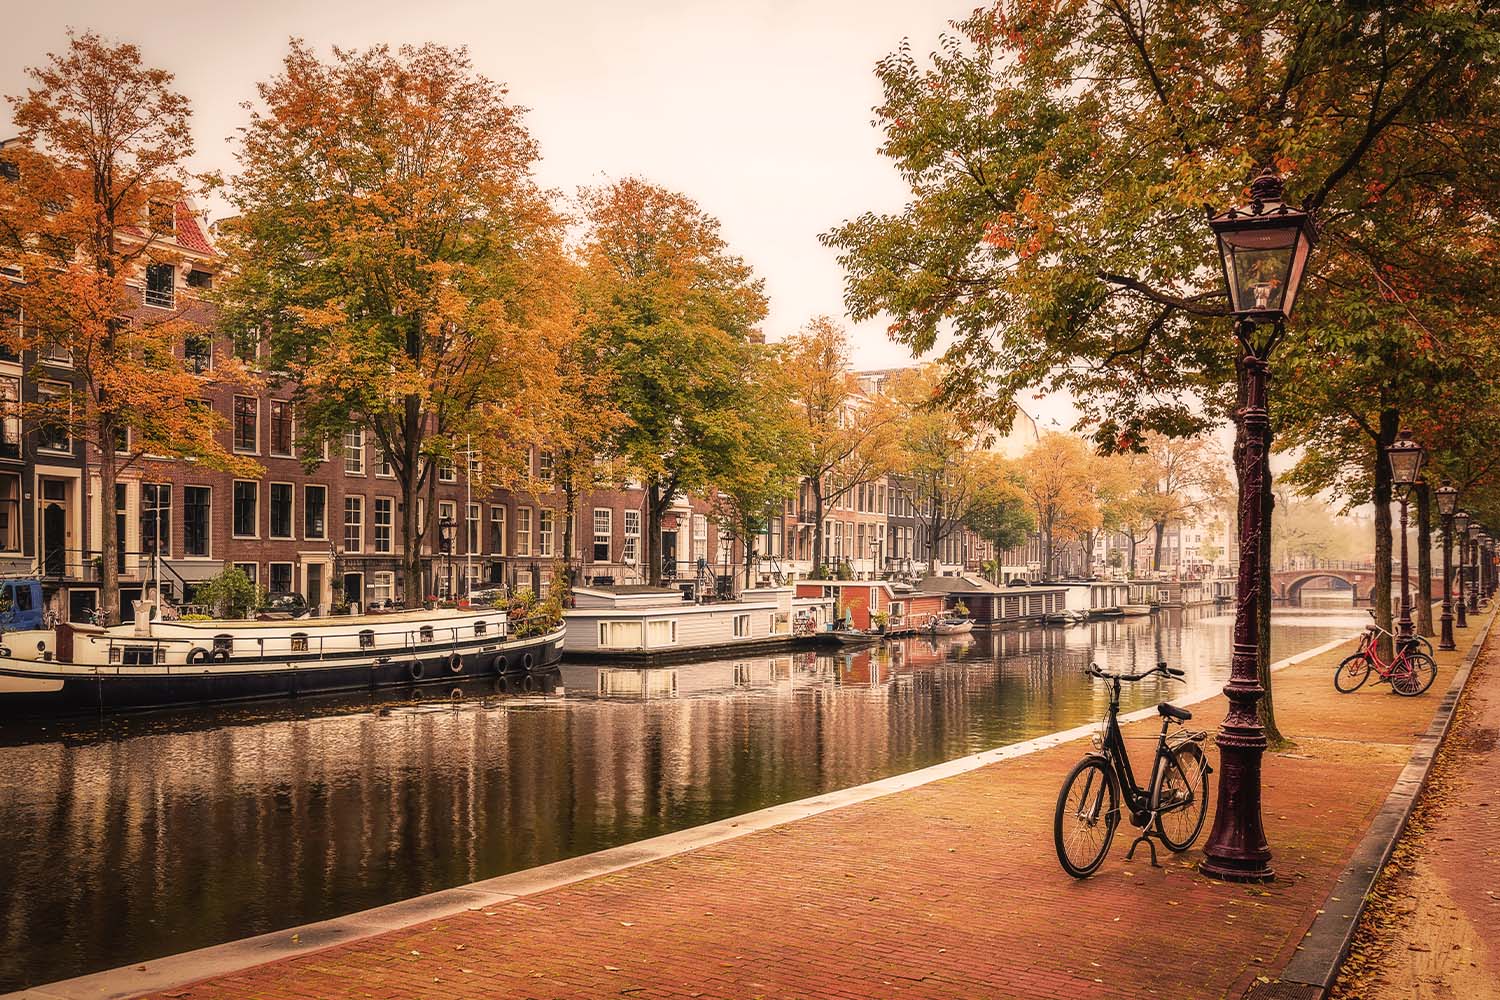 Amsterdam during an autumn day with rain.